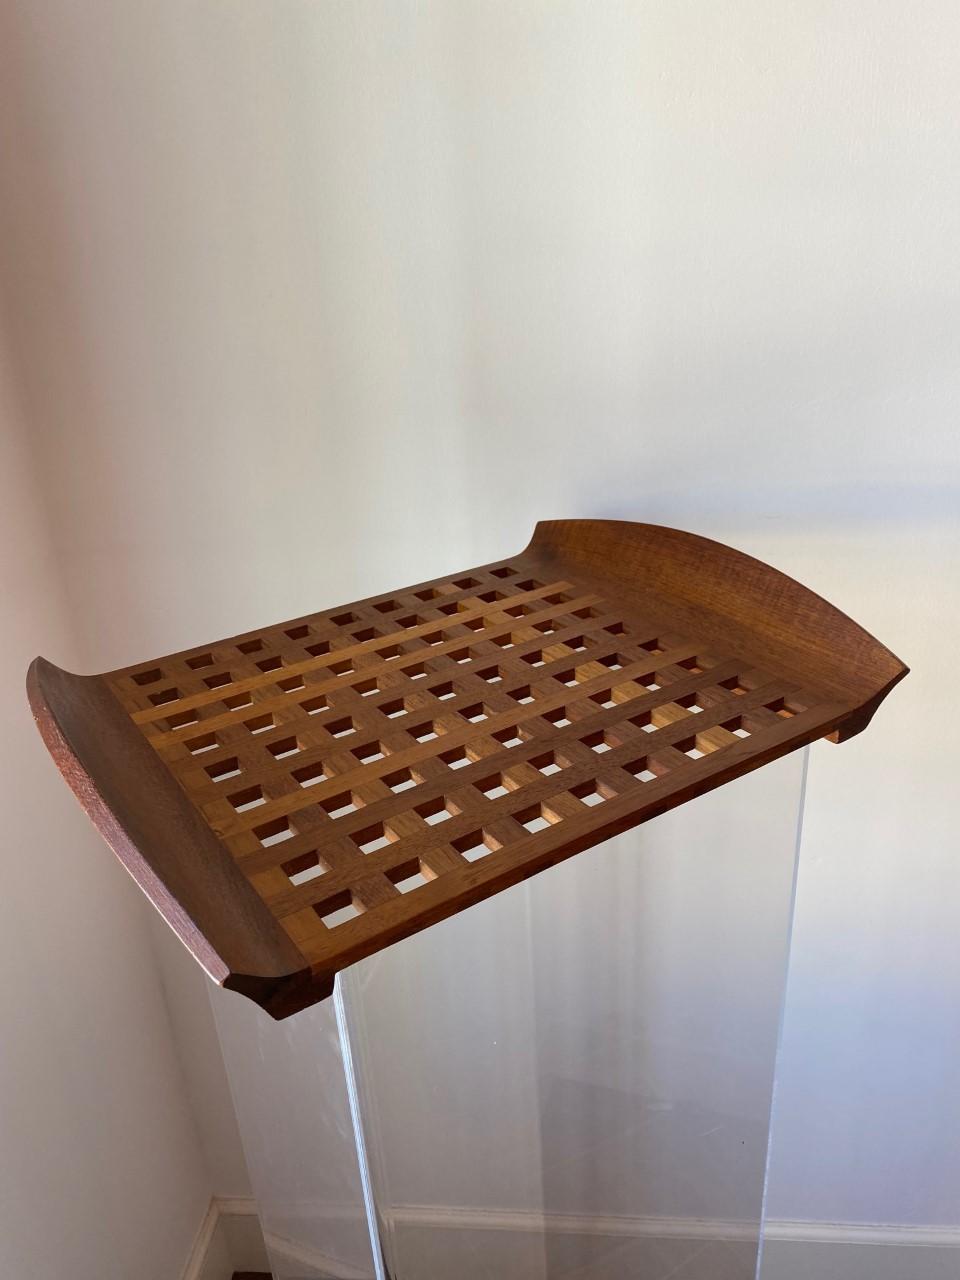 Midcentury 1950s Solid Teak Danish Modern Rare Tray by Quistgaard for Dansk In Good Condition For Sale In San Diego, CA